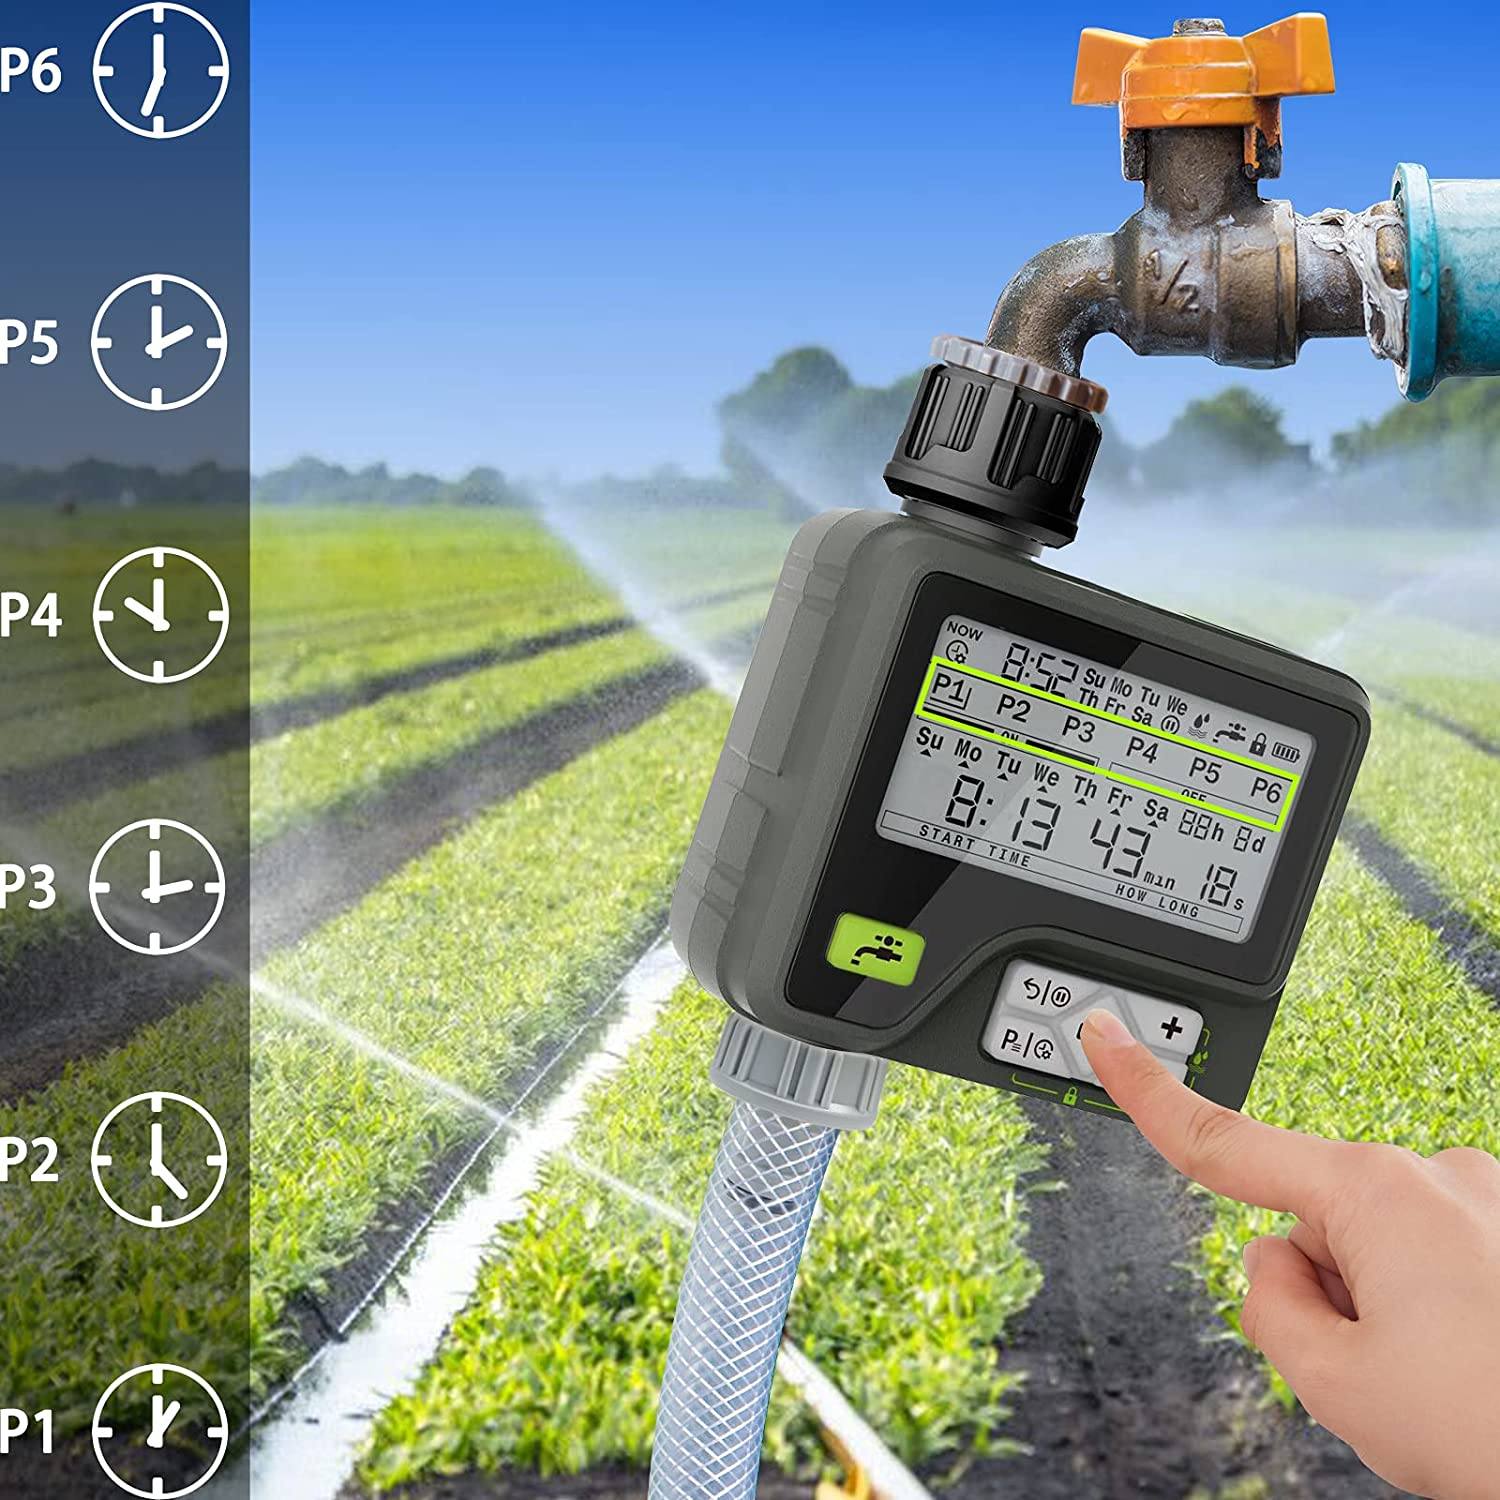 Latest Technology Irrigation Programmer. 6 Separate Irrigation Programmes For Garden Irrigation. Rain Auto Sensor. Waterproof. Also Manual Control For Garden Lawn. Up To 8 Bar Pressure!